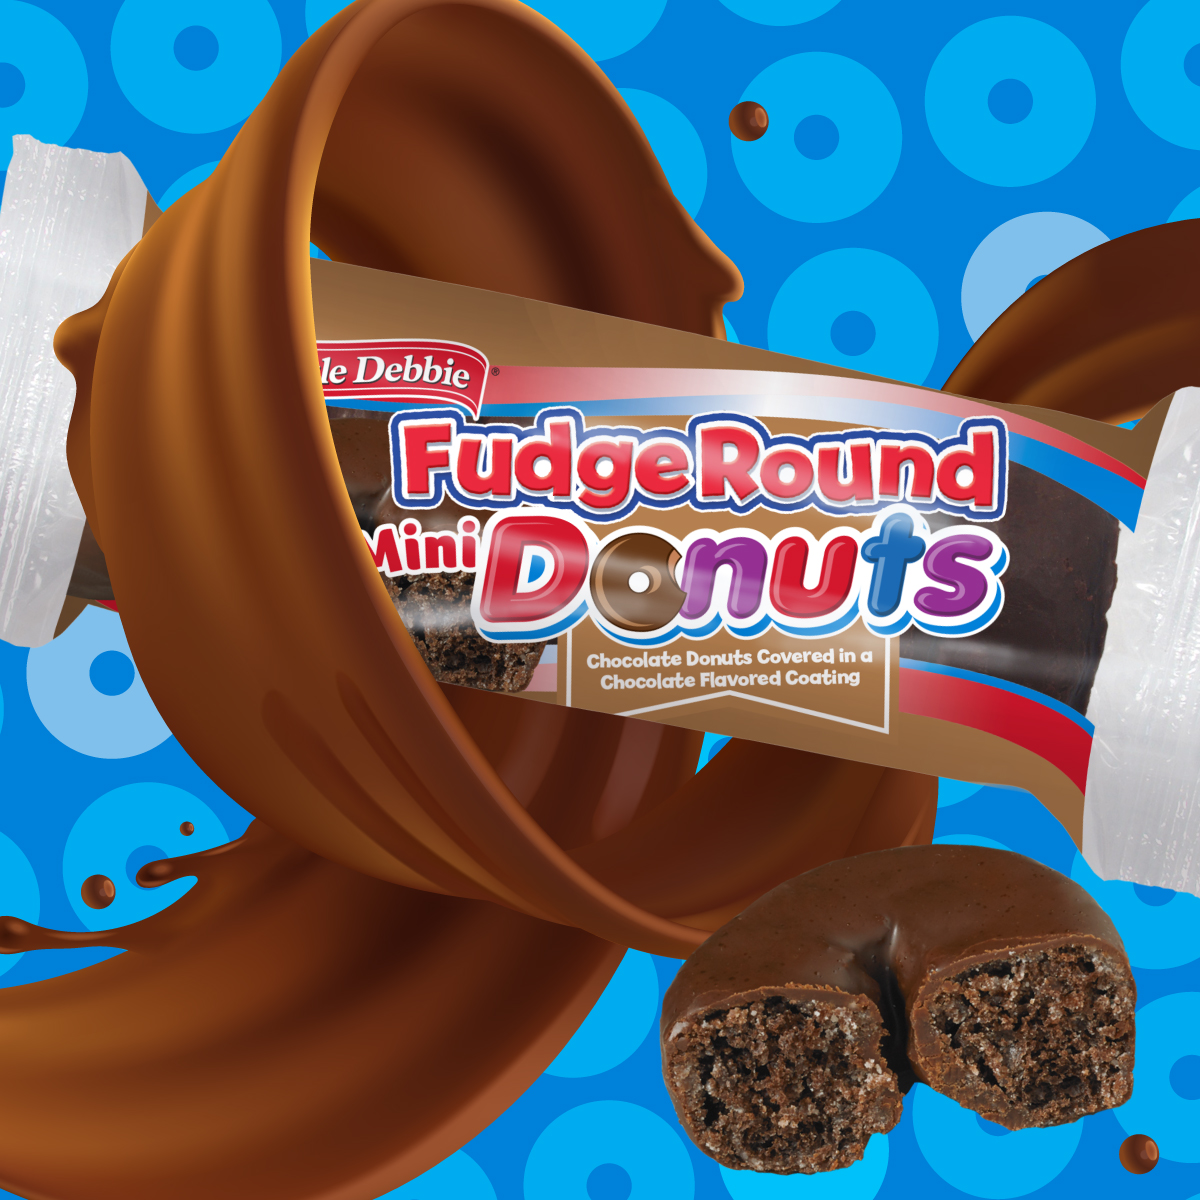 Try our Fudge Round Mini Donuts available now in a single serve sleeve! Grab a pack on your next trip to the convenience store! To find in a location near you, follow the link below! #LittleDebbie #Unwrapasmile #todaywebake littledebbie.com/www/findlocati…